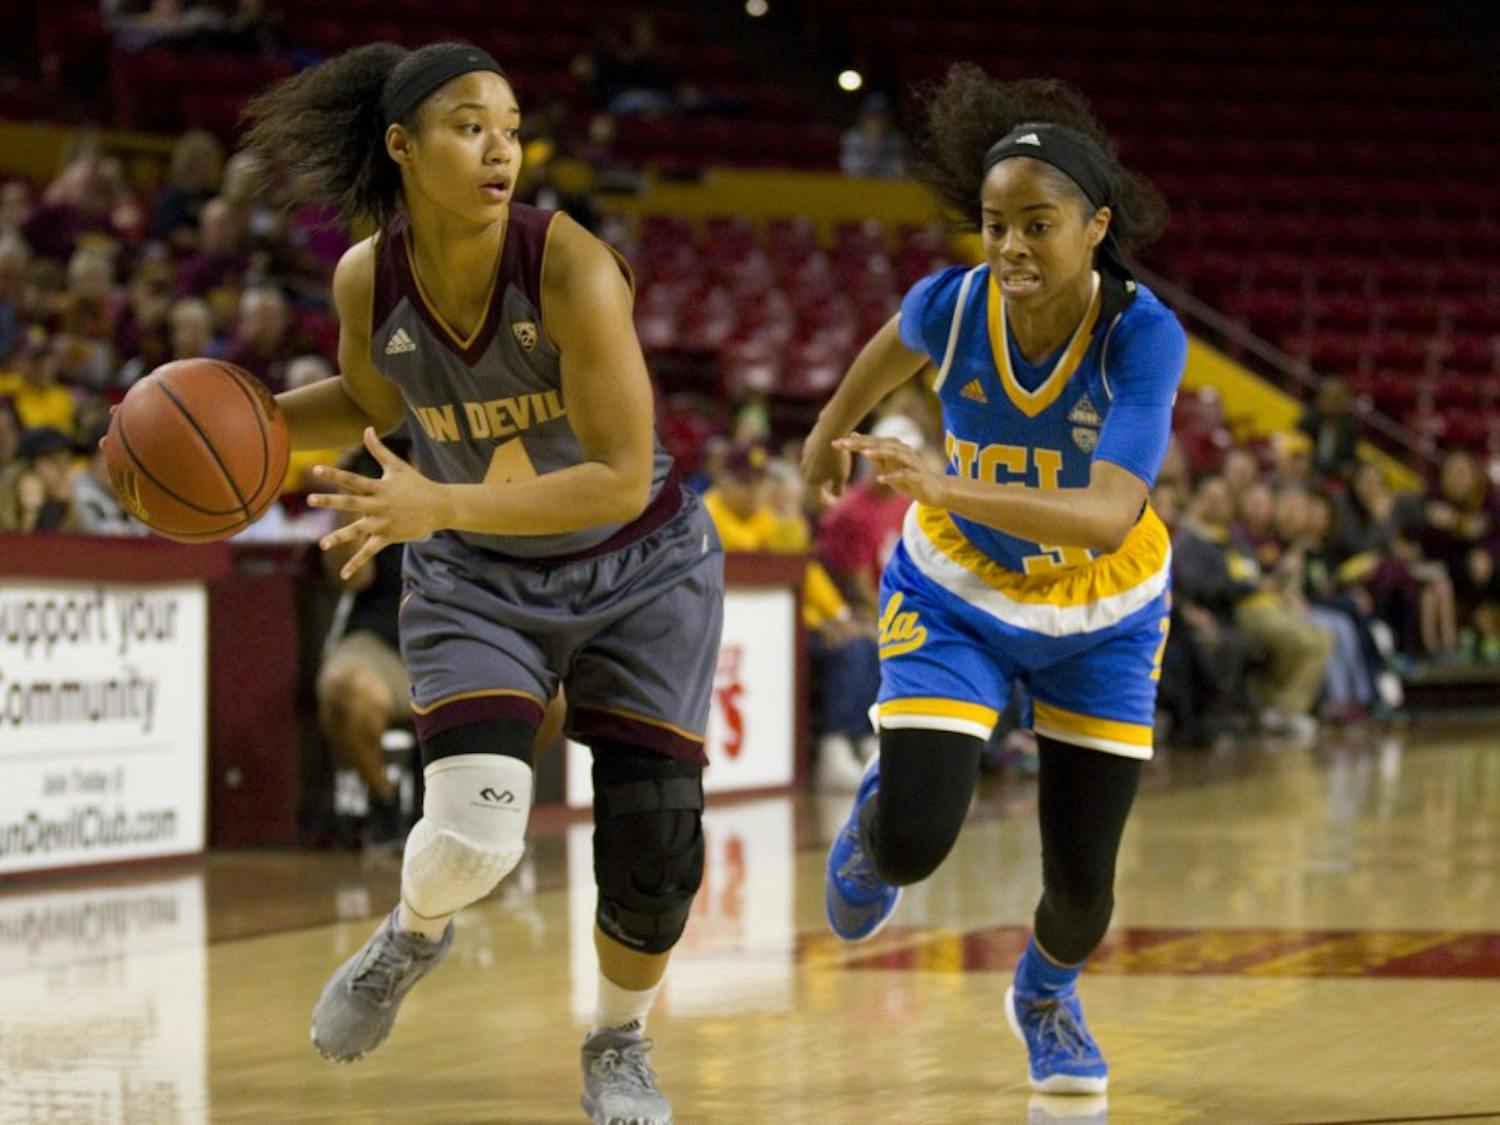 ASU freshman guard Kiara Russell (4) looks to drive to the basket during a women's basketball game against the no. 15 ranked UCLA Bruins in Wells Fargo Arena in Tempe, Arizona on Sunday, Feb. 26, 2017. ASU lost 55-52.  (Josh Orcutt/State Press)